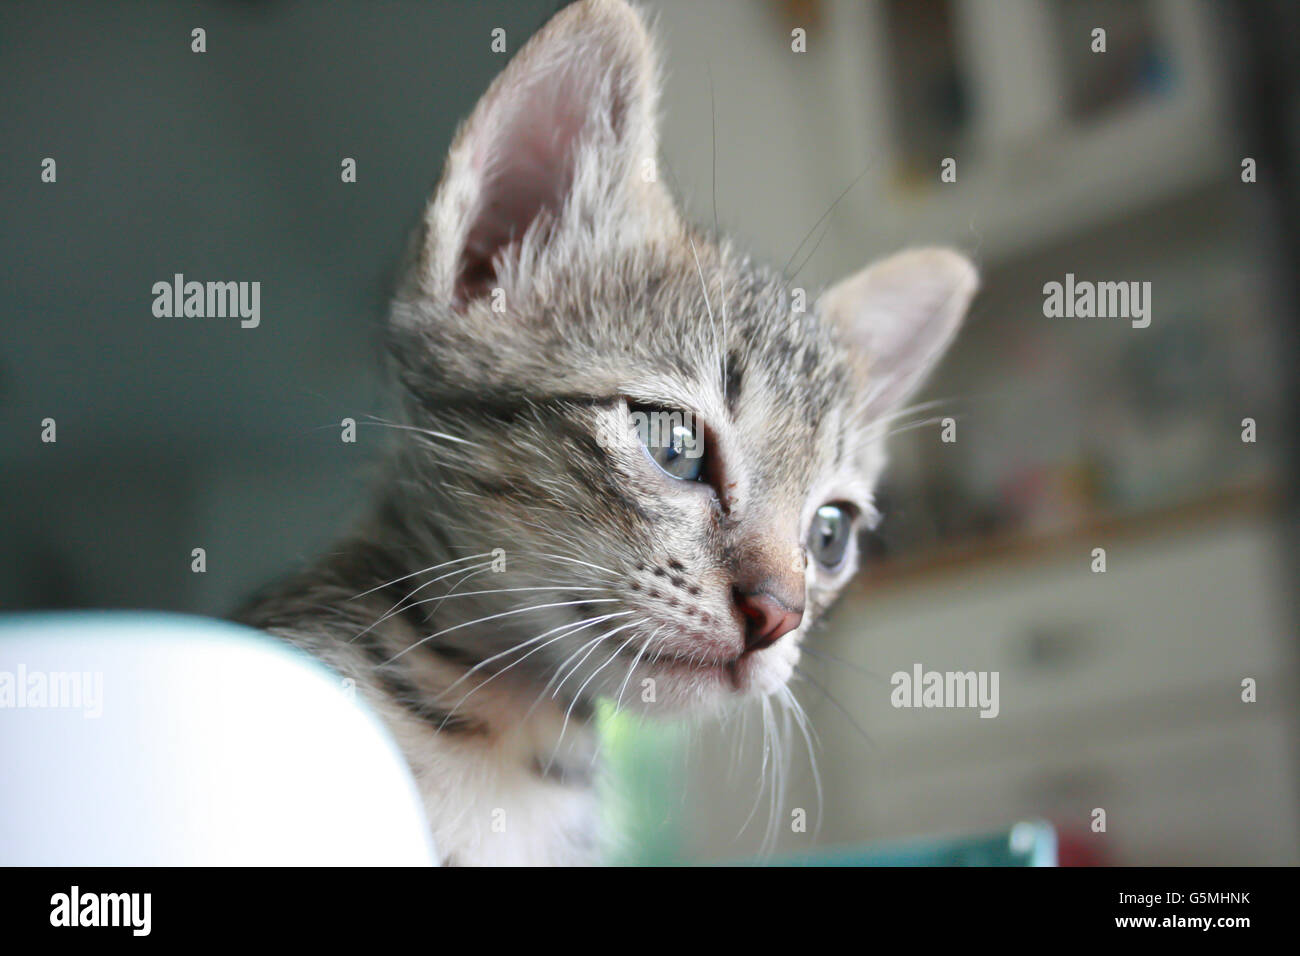 Adorable funny Cute Kitten cat face standing looking curiously. finding waiting for something outside. Stock Photo